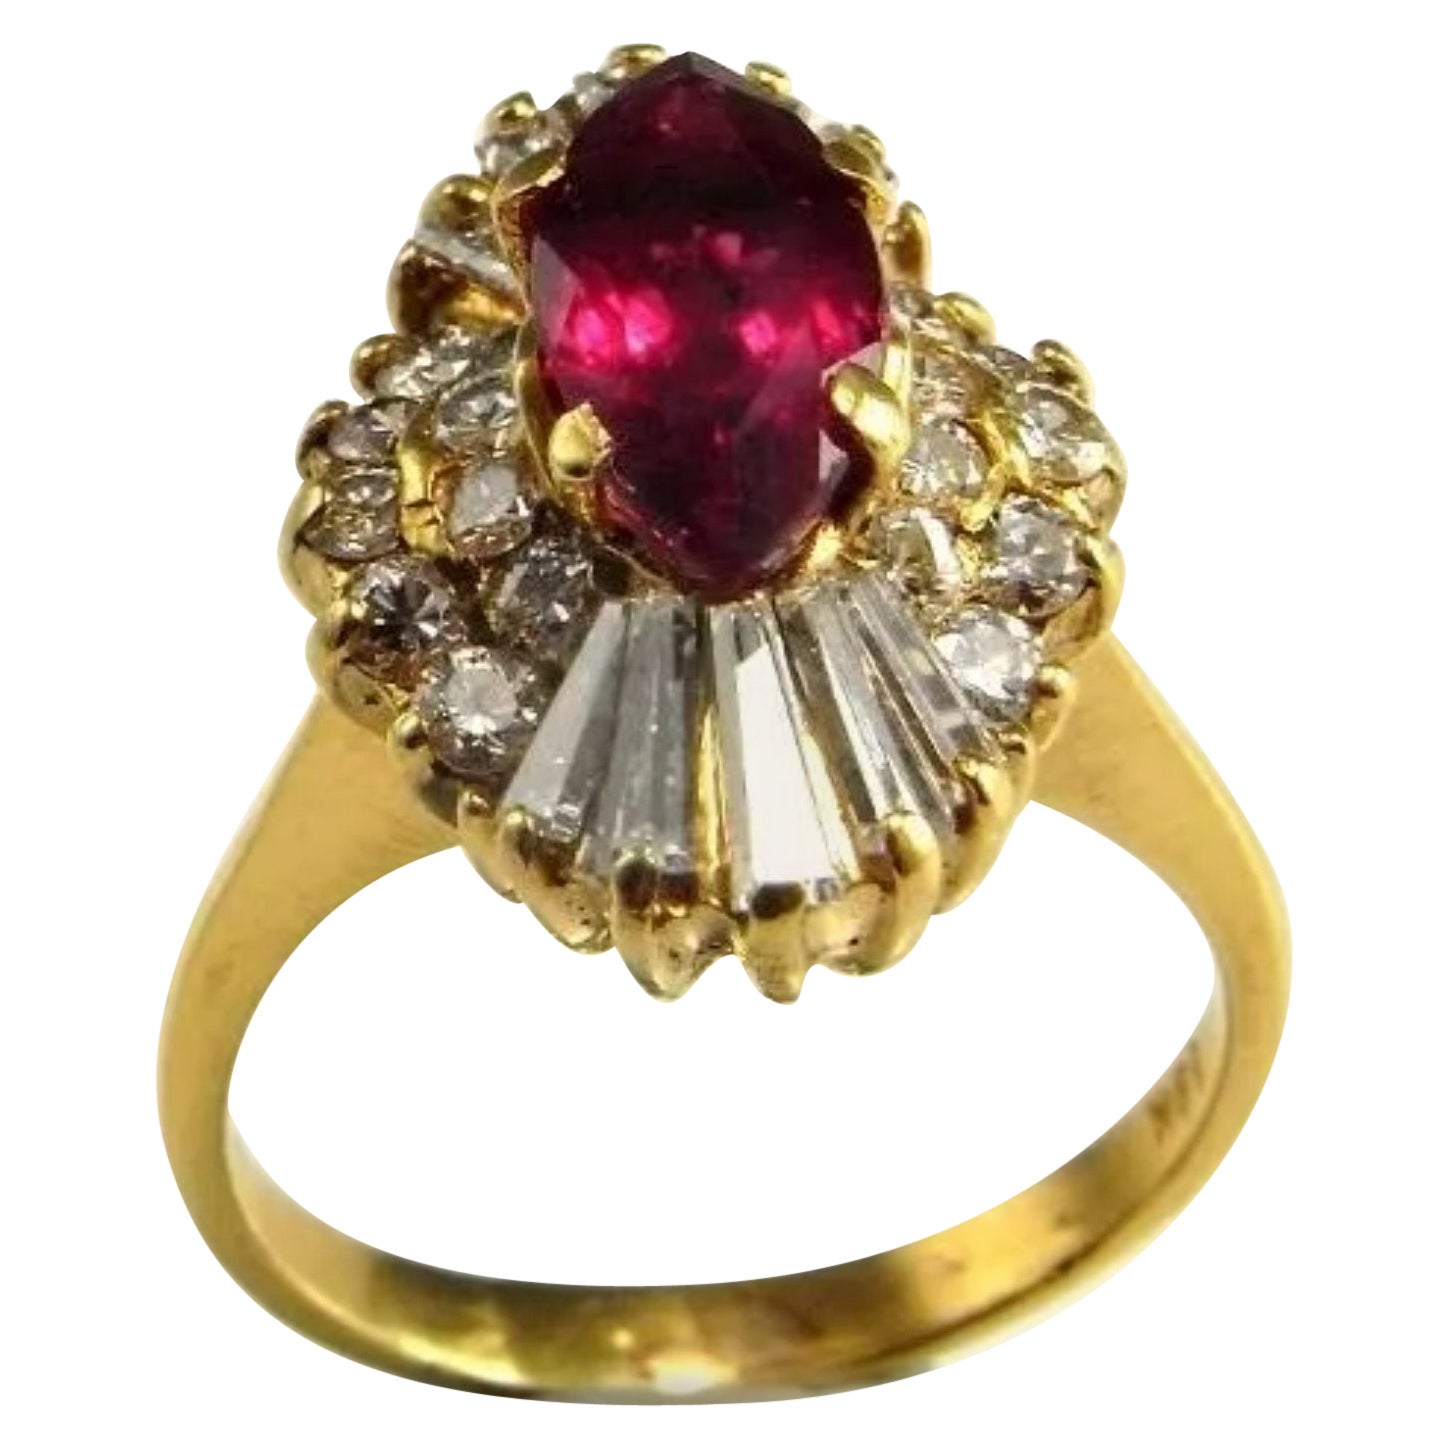 For Sale:  2 Carat Marquise Cut Ruby Diamond Engagement Ring, Ruby Diamond Wedding Ring